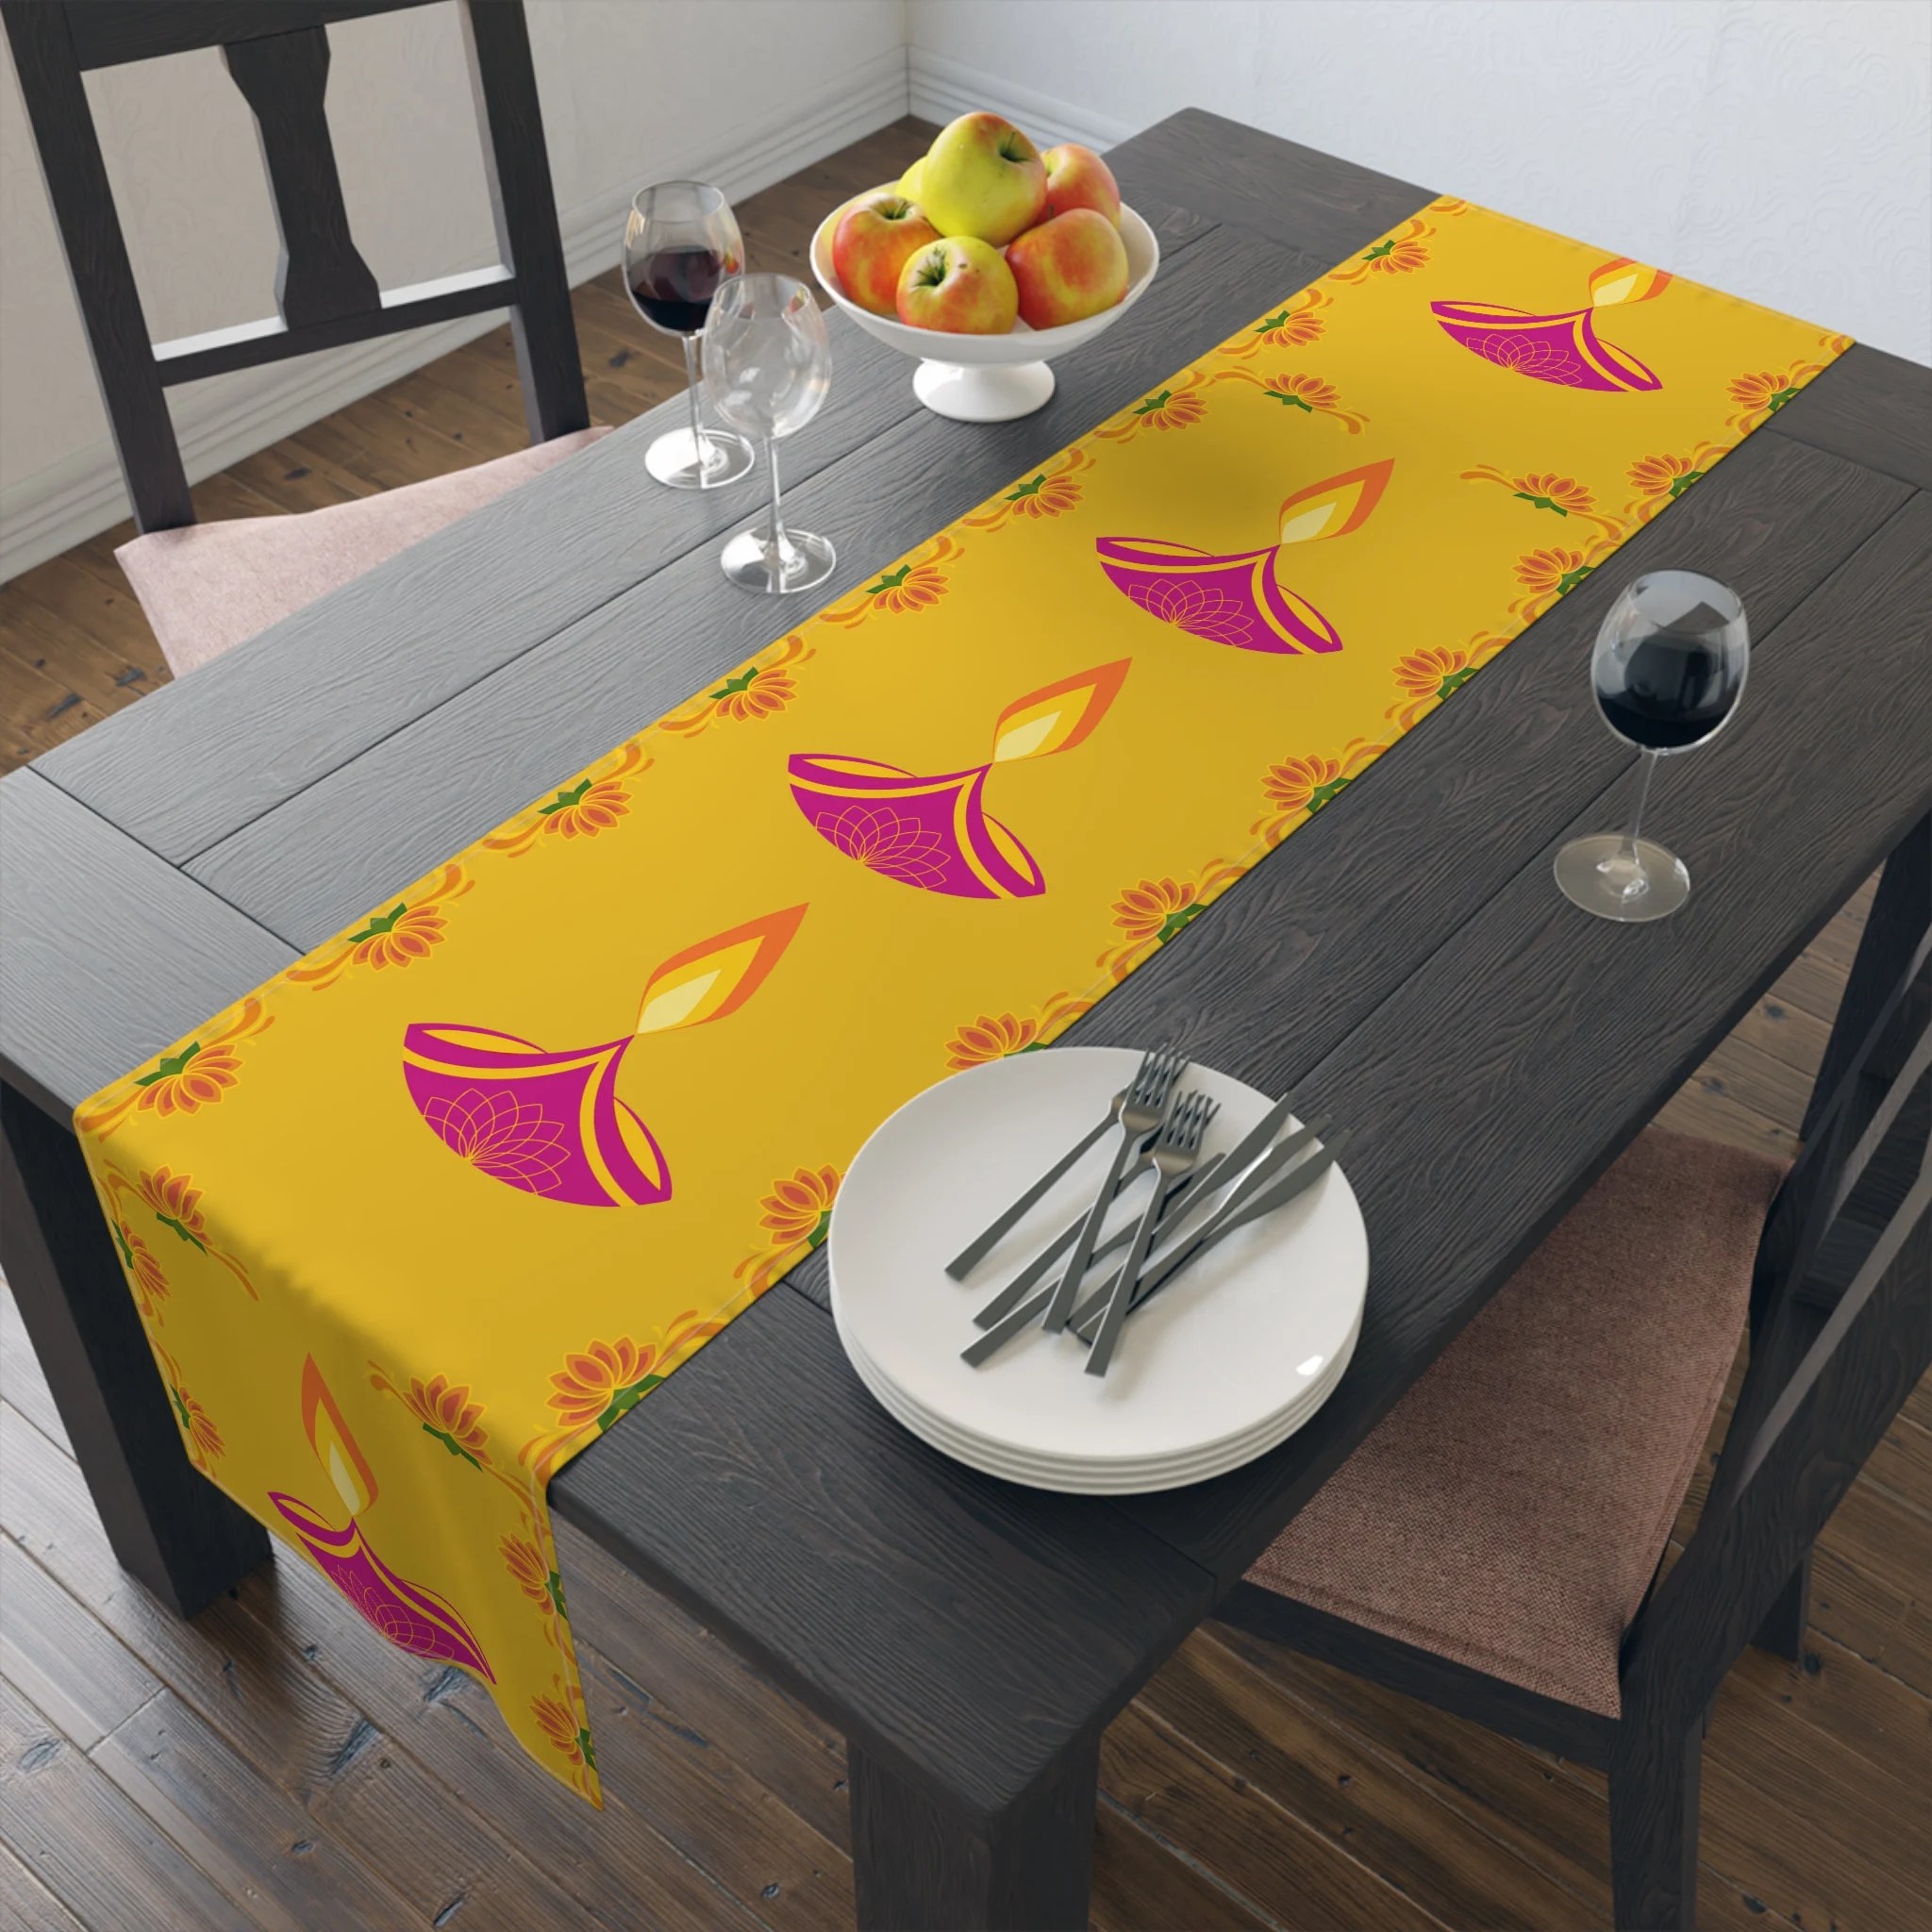 Table Runner | Diwali Golden | Cotton Twill or Polyester